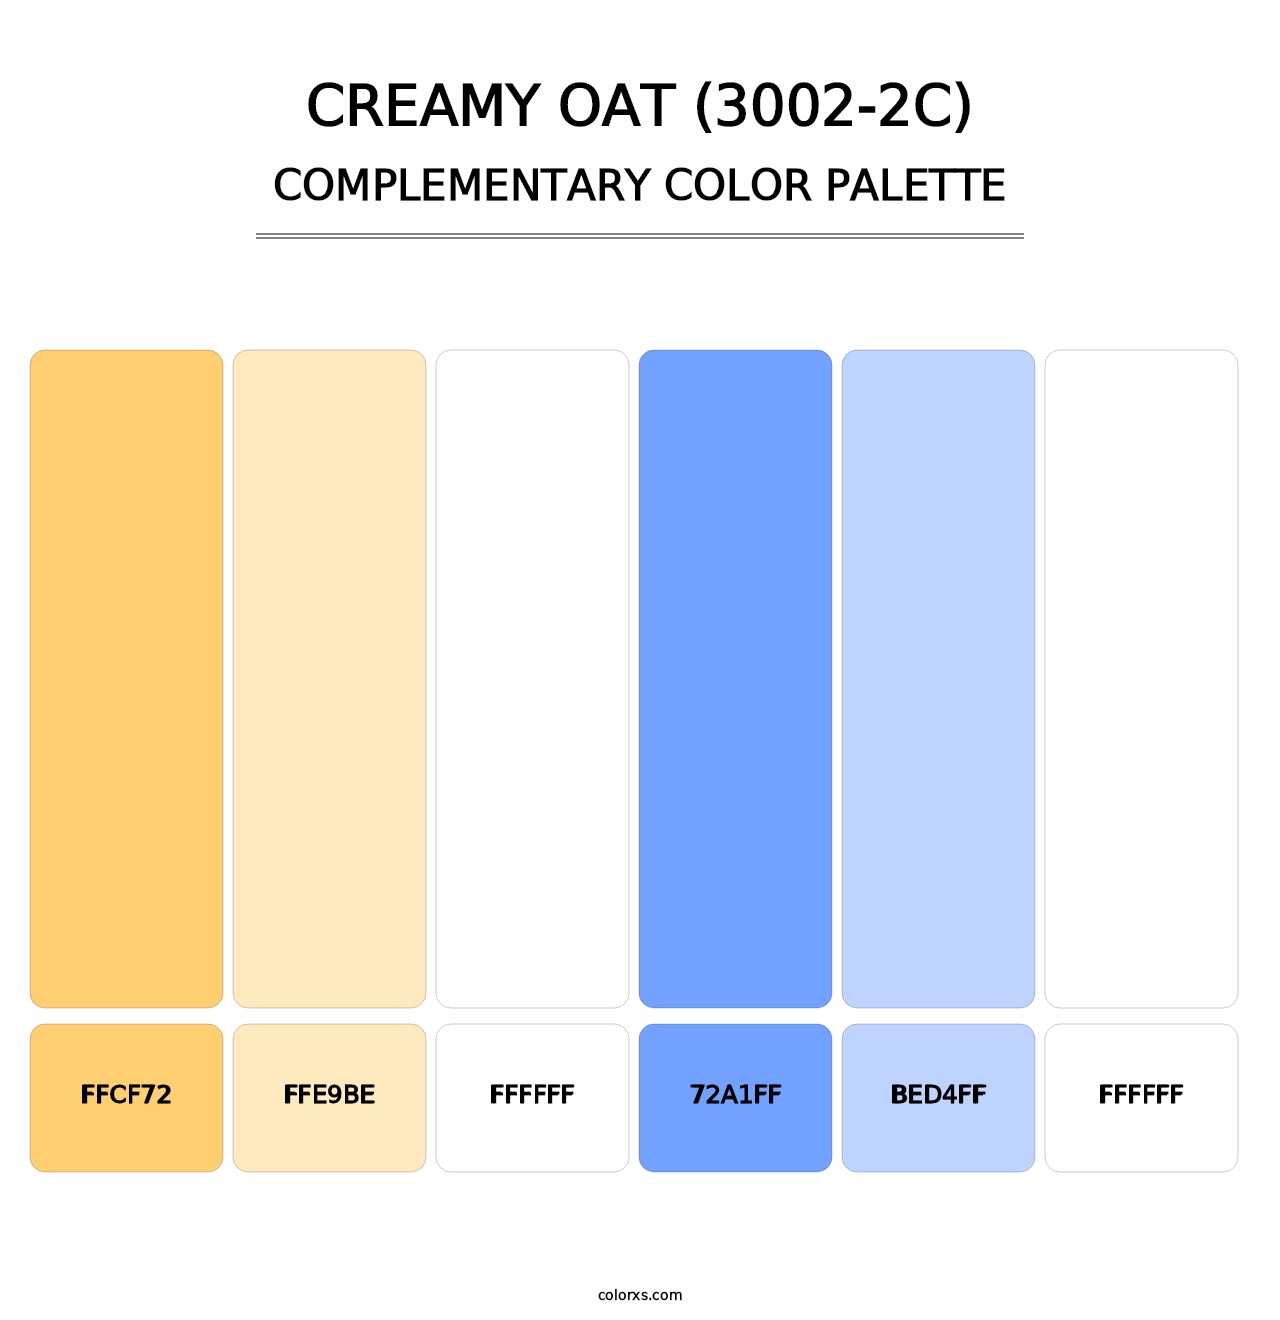 Creamy Oat (3002-2C) - Complementary Color Palette